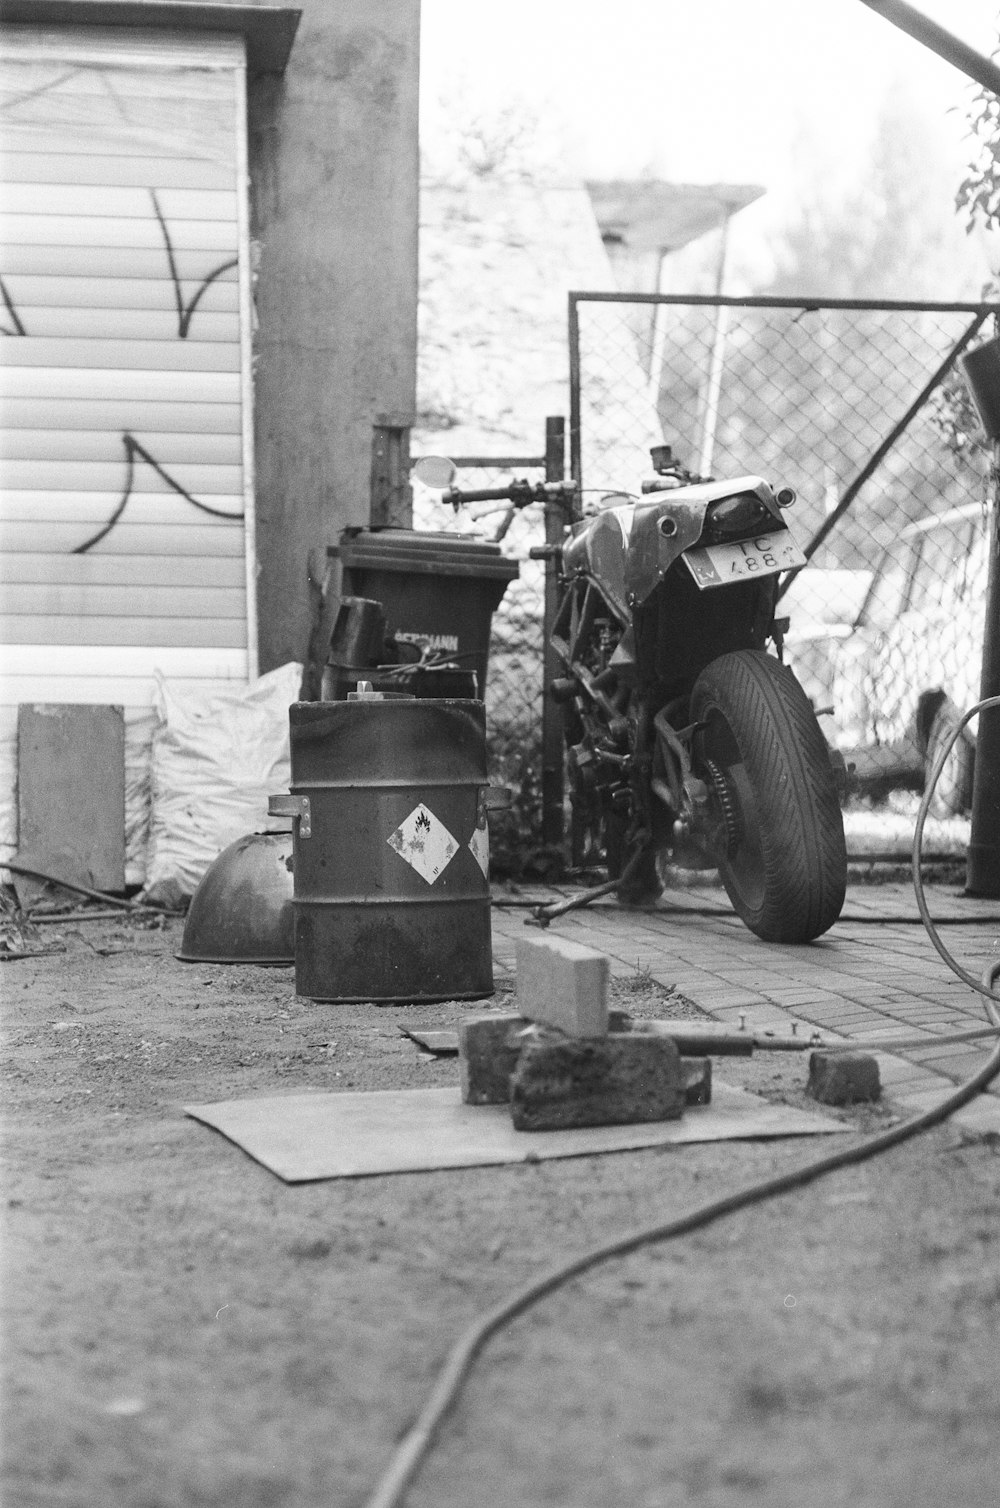 a black and white photo of a motorcycle on the ground